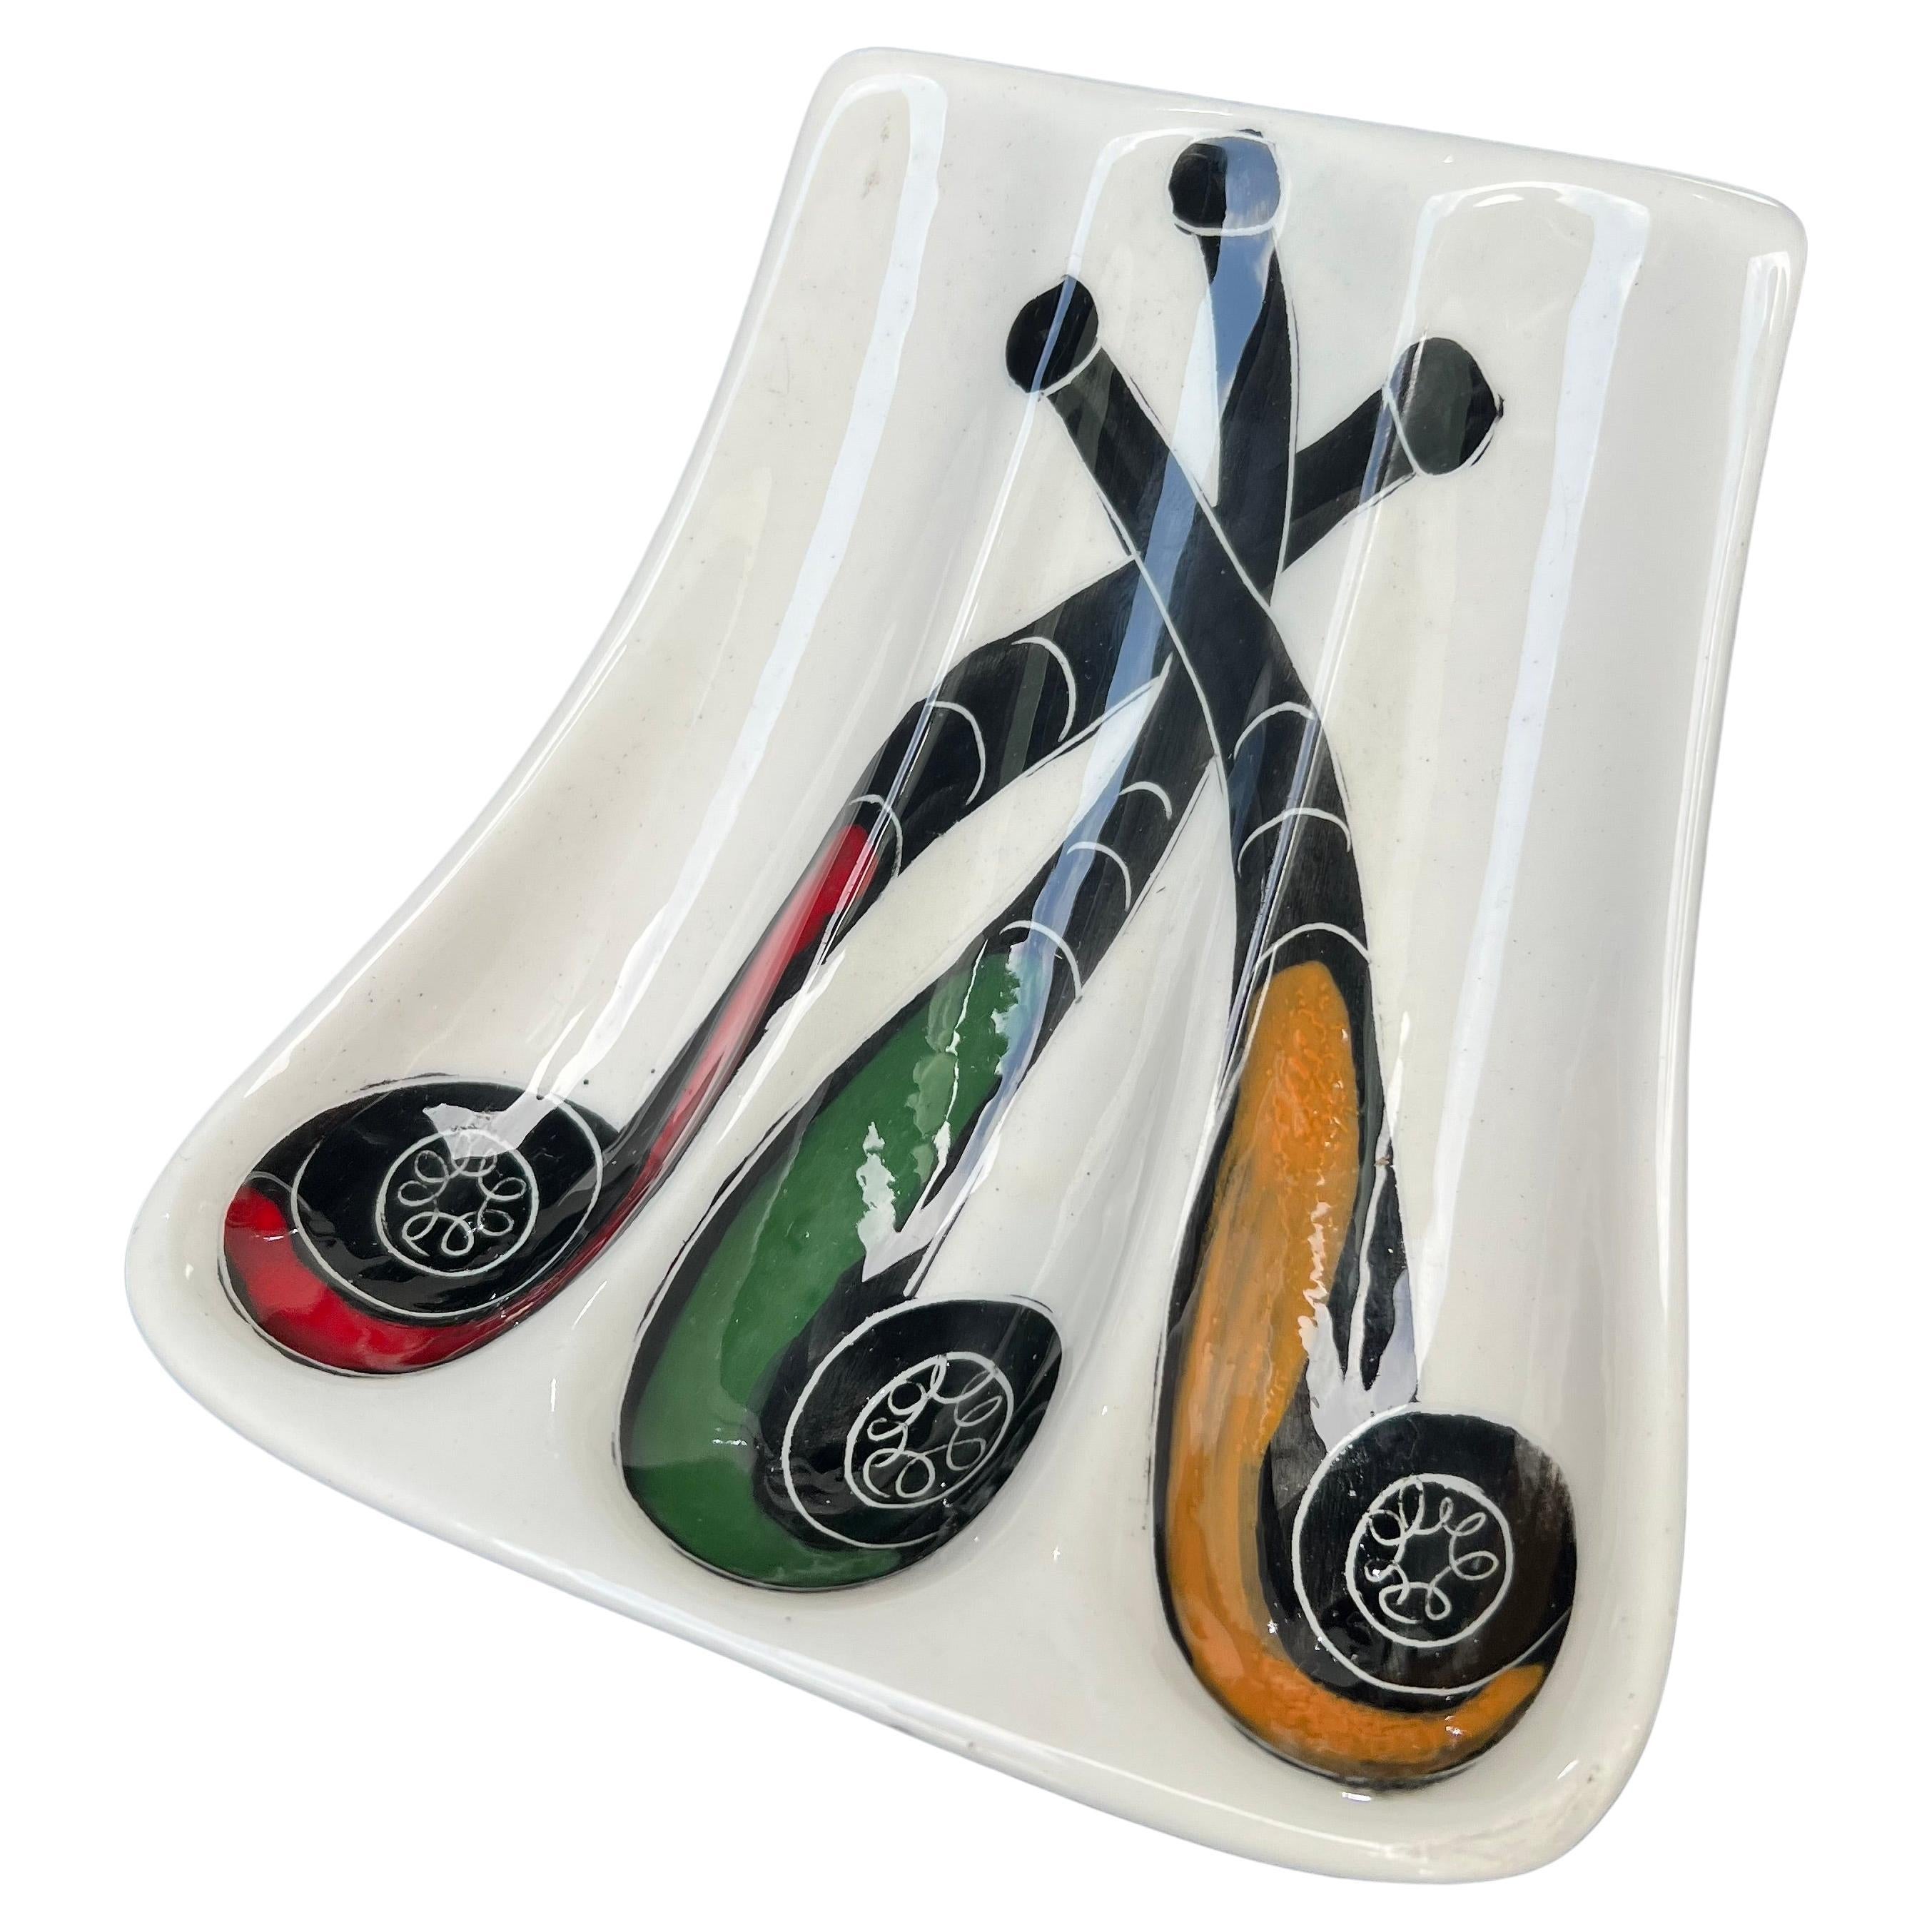 Ceramic Italian Pipe or 420 holder with Illustrated pipes For Sale